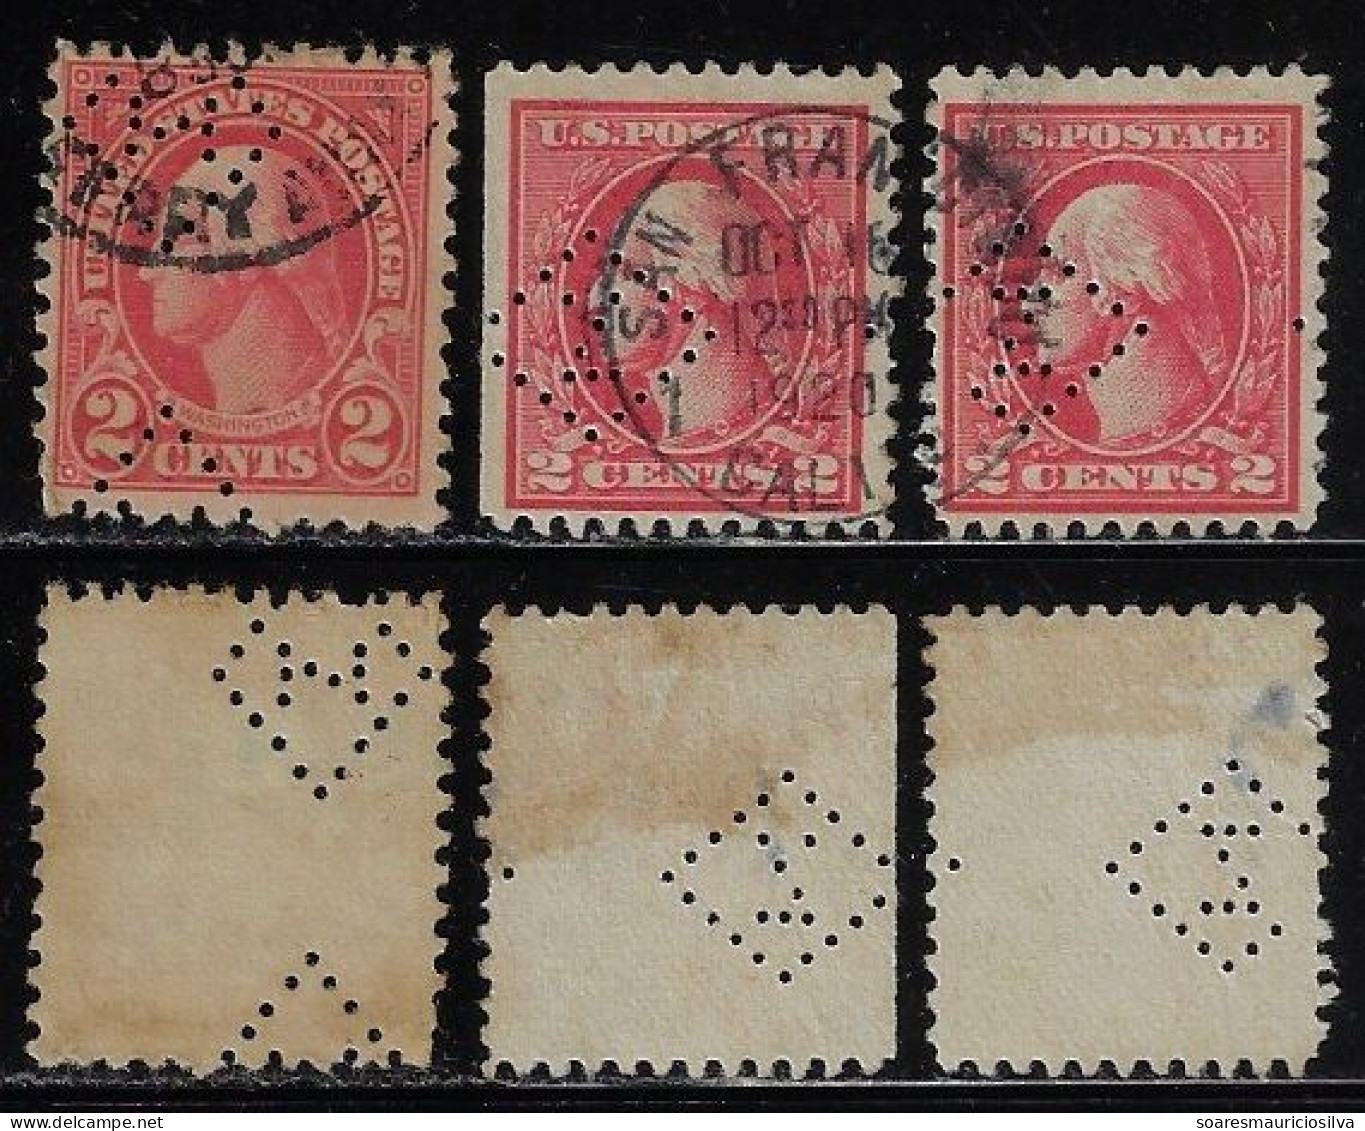 USA United States 1902/1938 3 Stamp Perfin Z (circle) By Zellerbach Paper Company From San Francisco lochung Perfore - Perforados